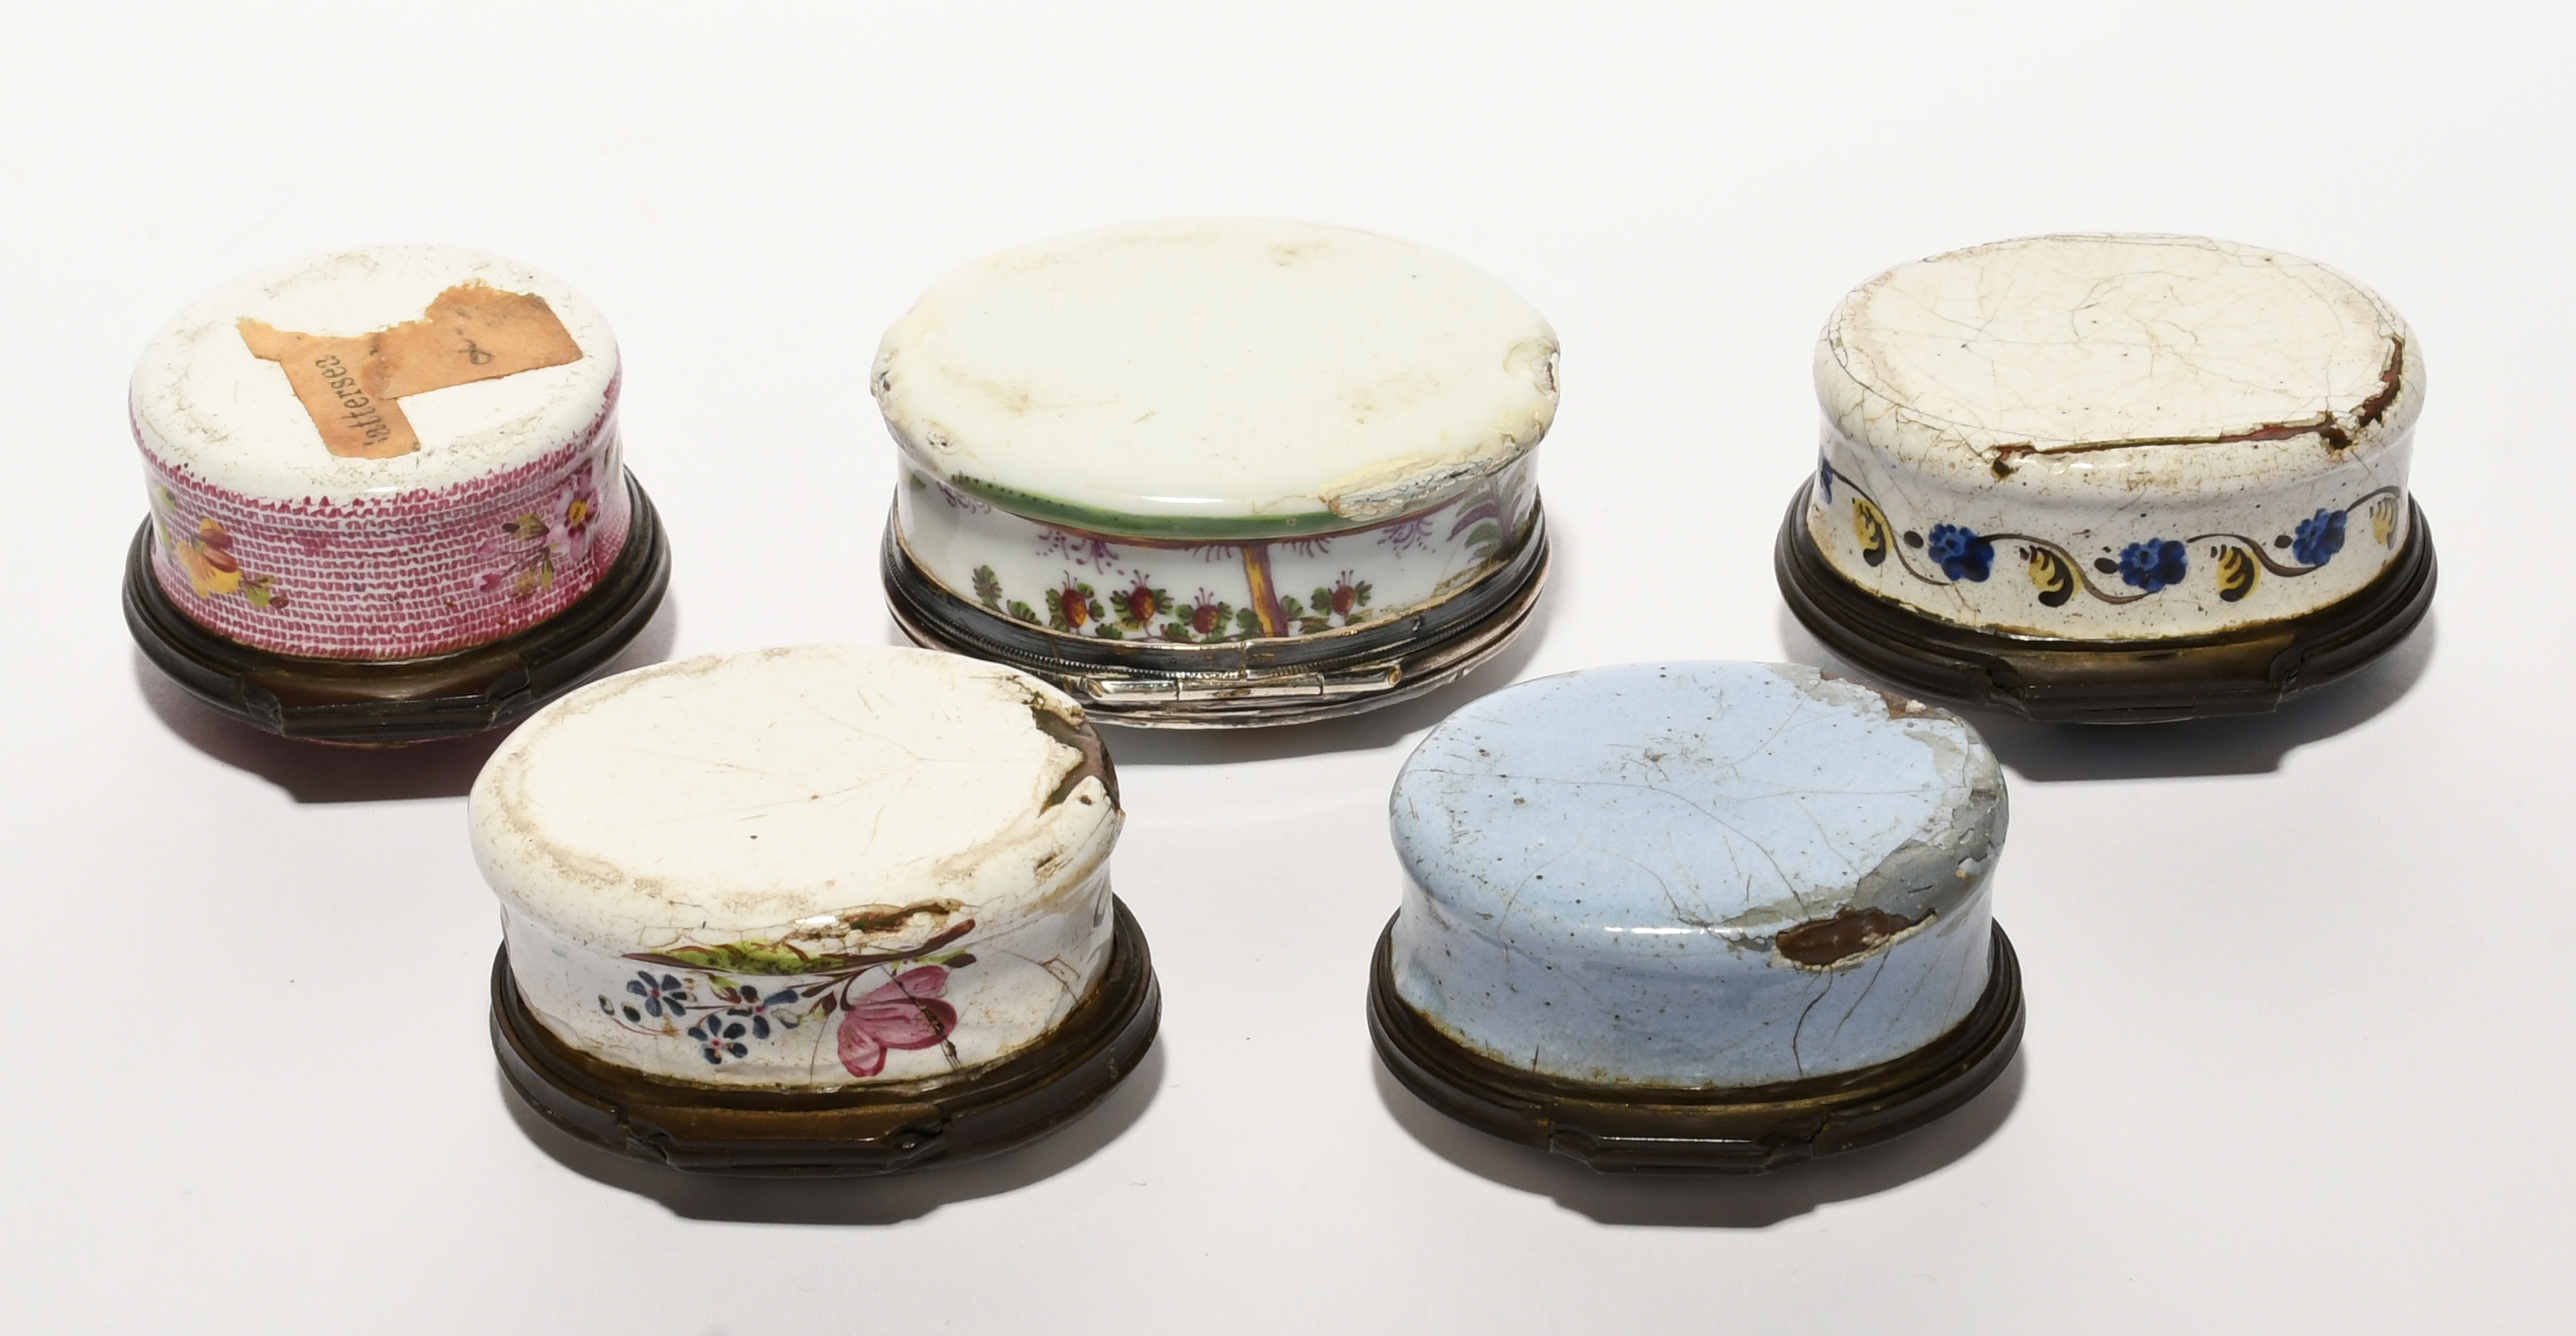 Five enamel patch boxes, 2nd half 18th century, one circular and painted with a rose spray on a dark - Image 2 of 3